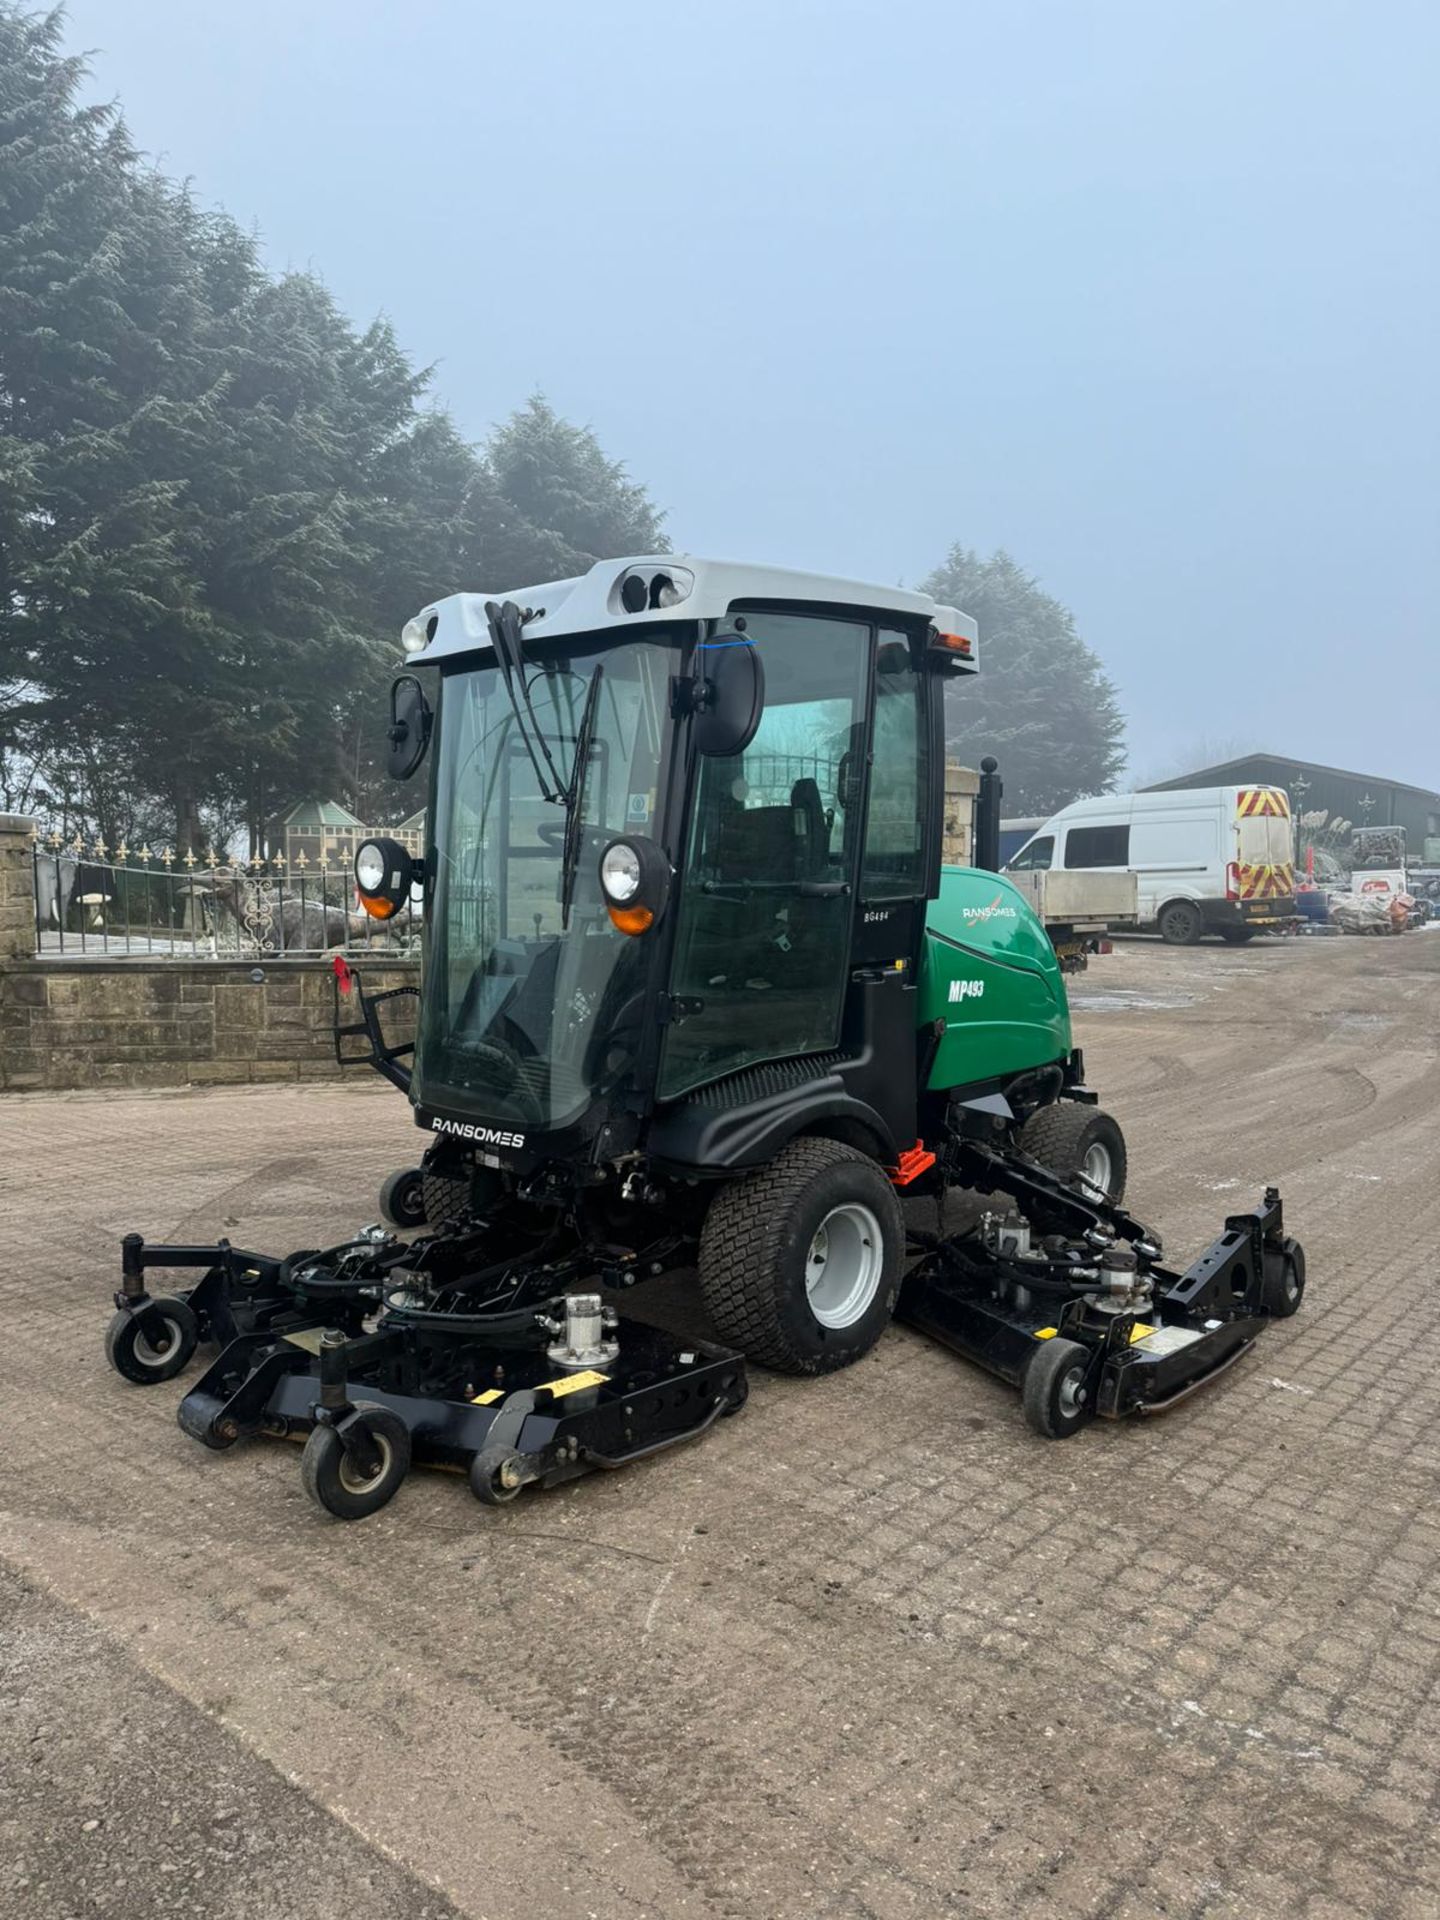 2016 RANSOMES RMP493 BATWING RIDE ON LAWN MOWER WITH FULL GLASS CAB *PLUS VAT* - Image 27 of 33